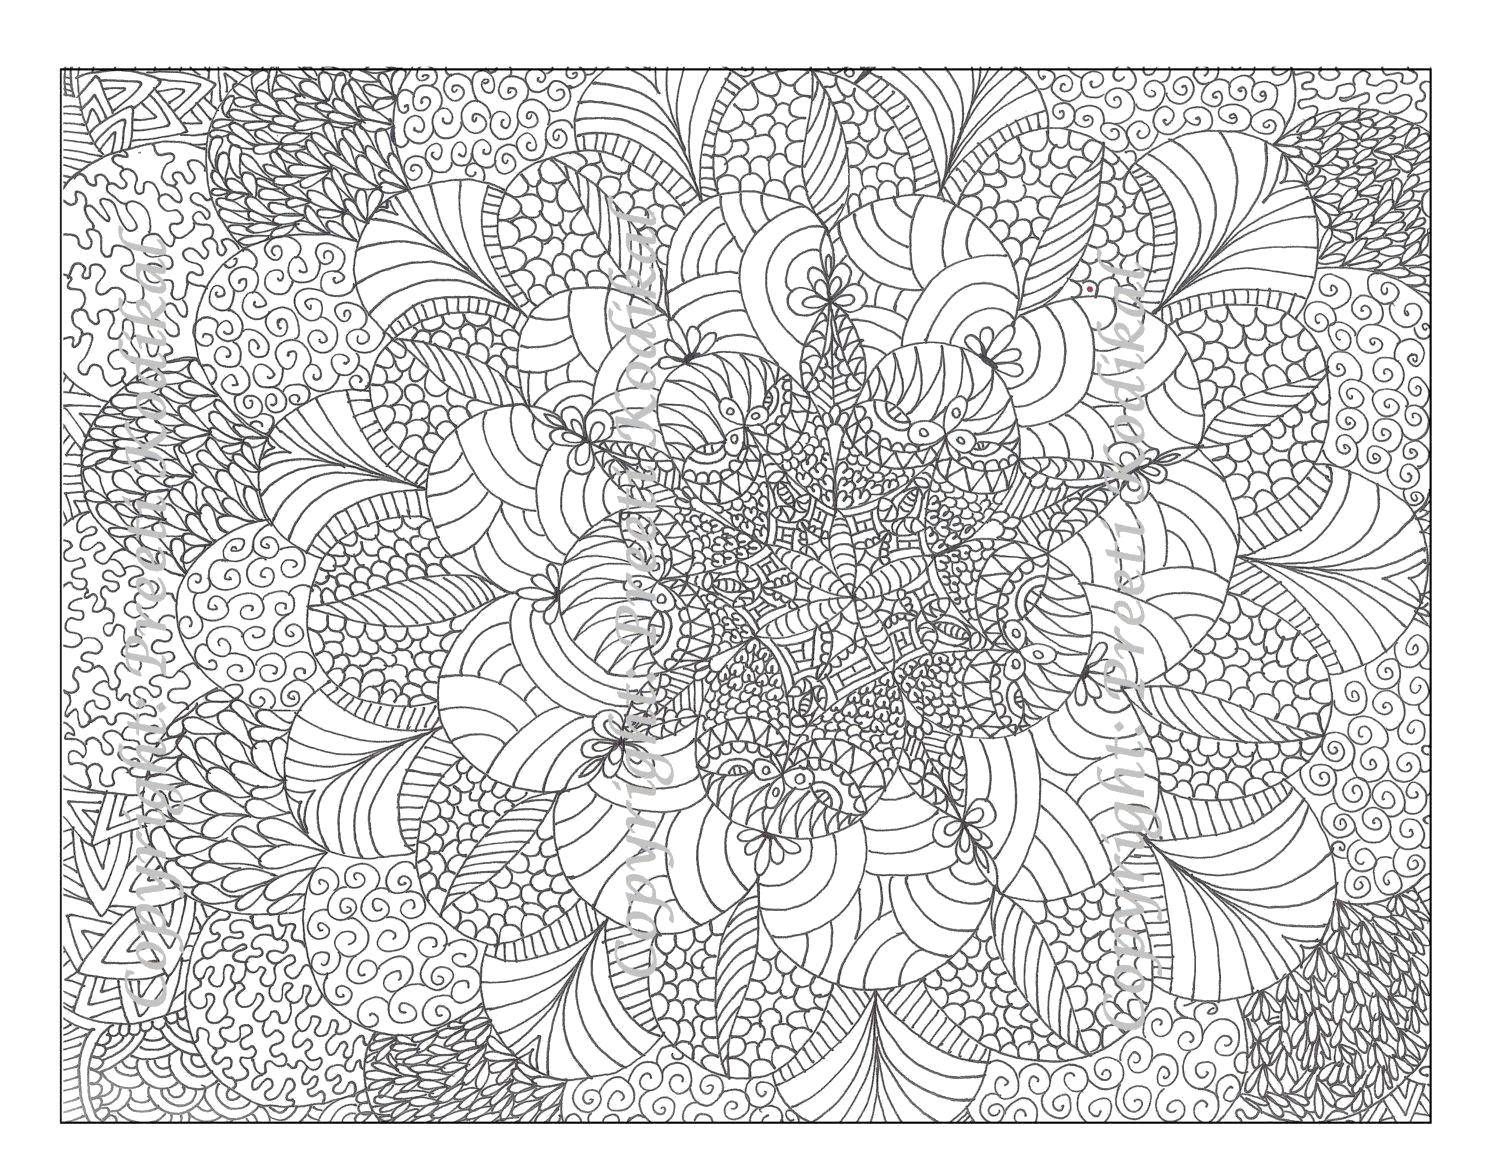 Coloring Pattern with small parts. Category patterns. Tags:  Patterns, flower.